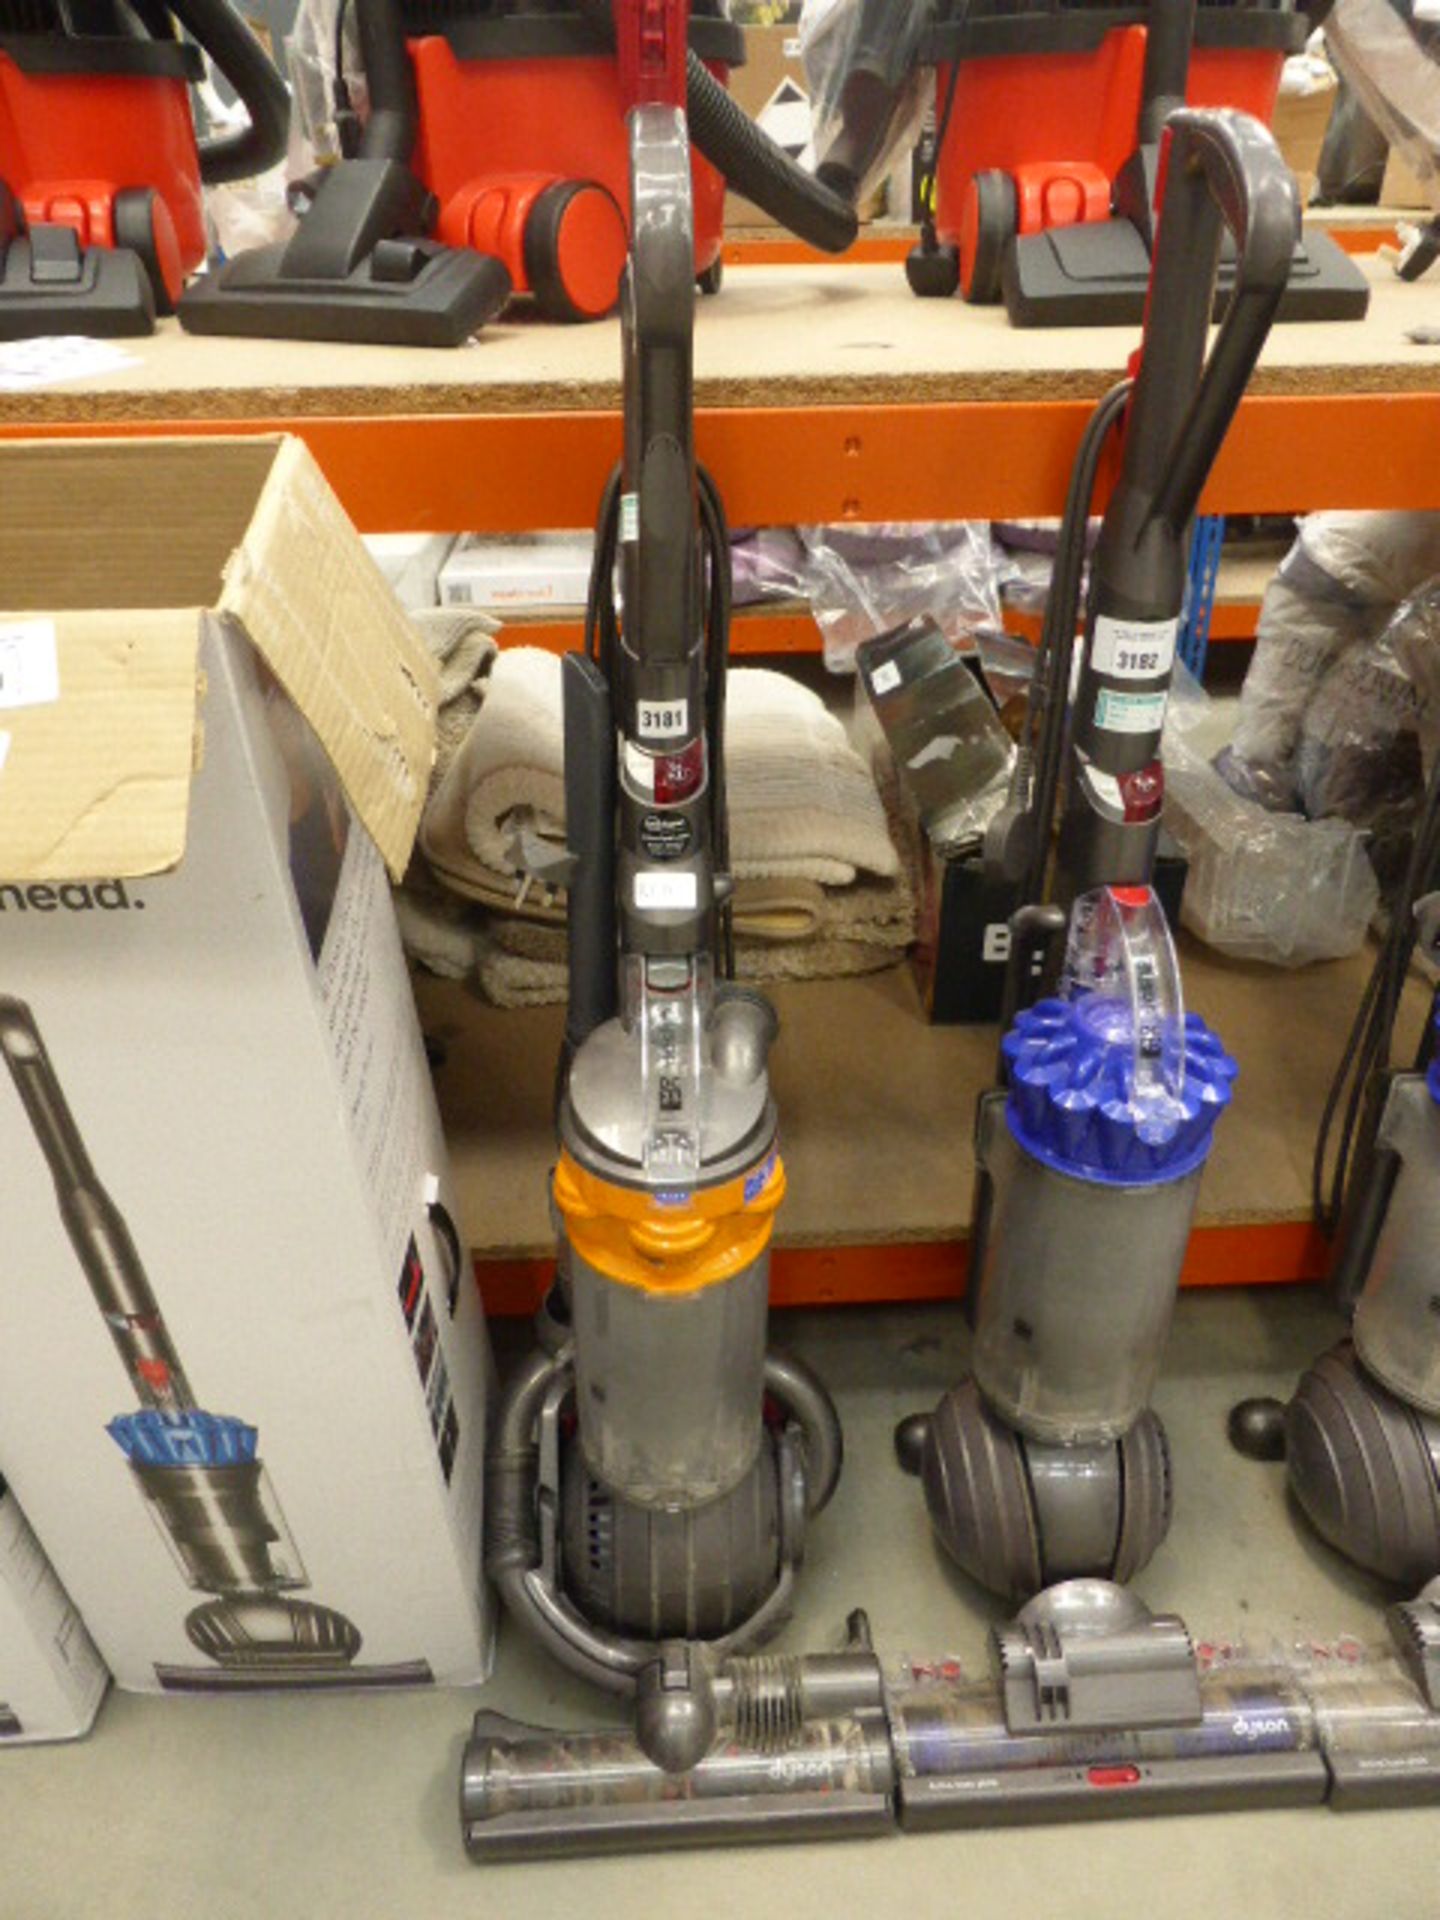 3230 Upright Dyson dc40 vacuum cleaner